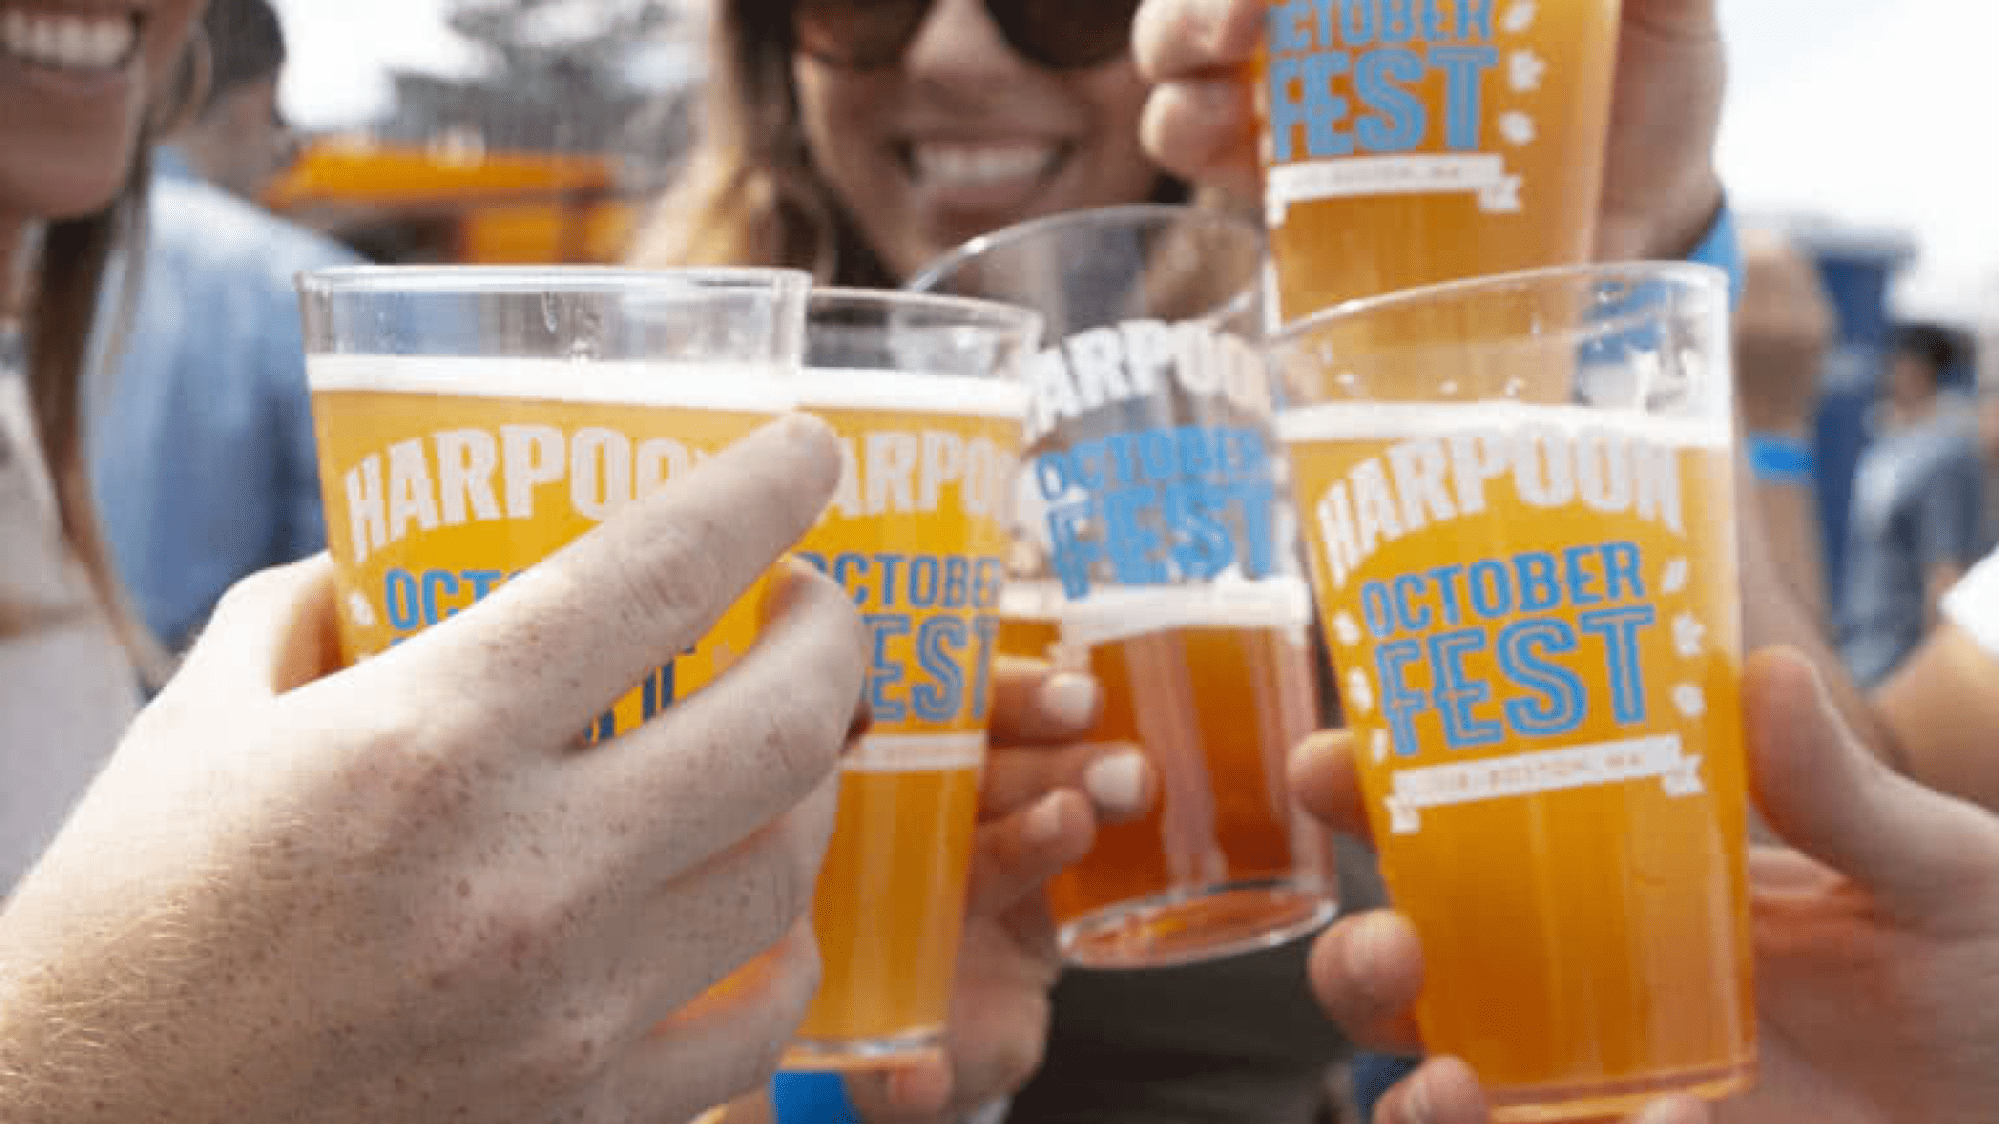 Octoberfest partiers toast with glasses of beer